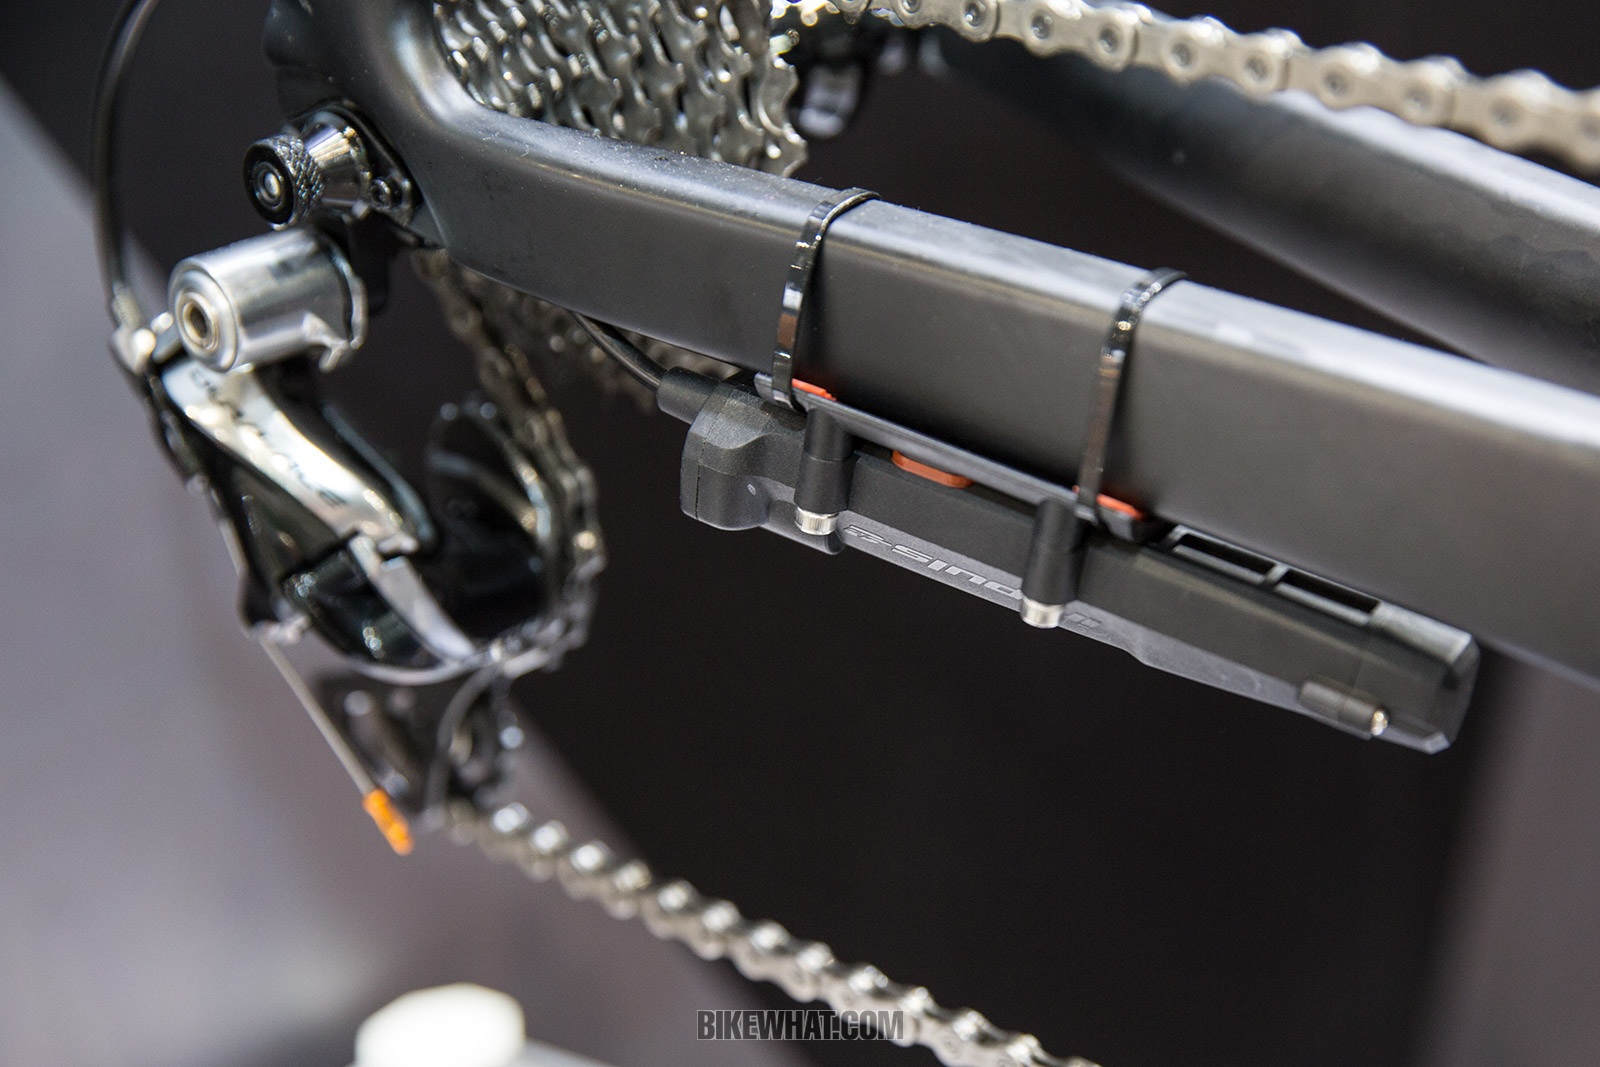 Feature_TaipeiCycle_2019_Xshifter_1.jpg